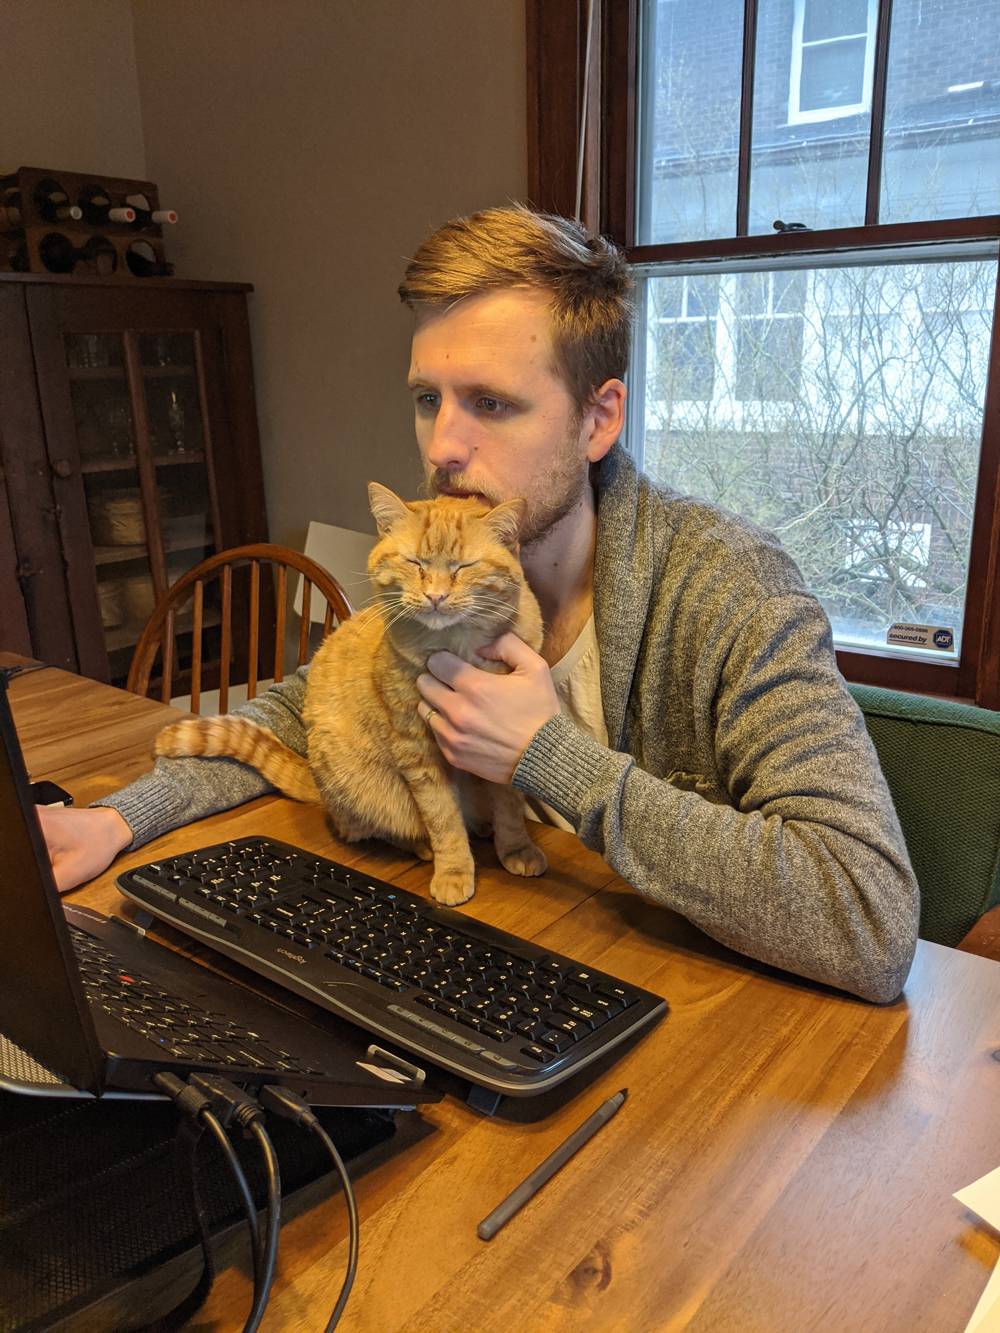 Jonathan Hafer is seated at a wood dining table. On the table is an orange cat. Hafer has his left hand on the cat, and the cat's eyes are closed. The cat looks blissed out. Hafer is working at at computer. Photo courtesy of Jonathan Hafer. 